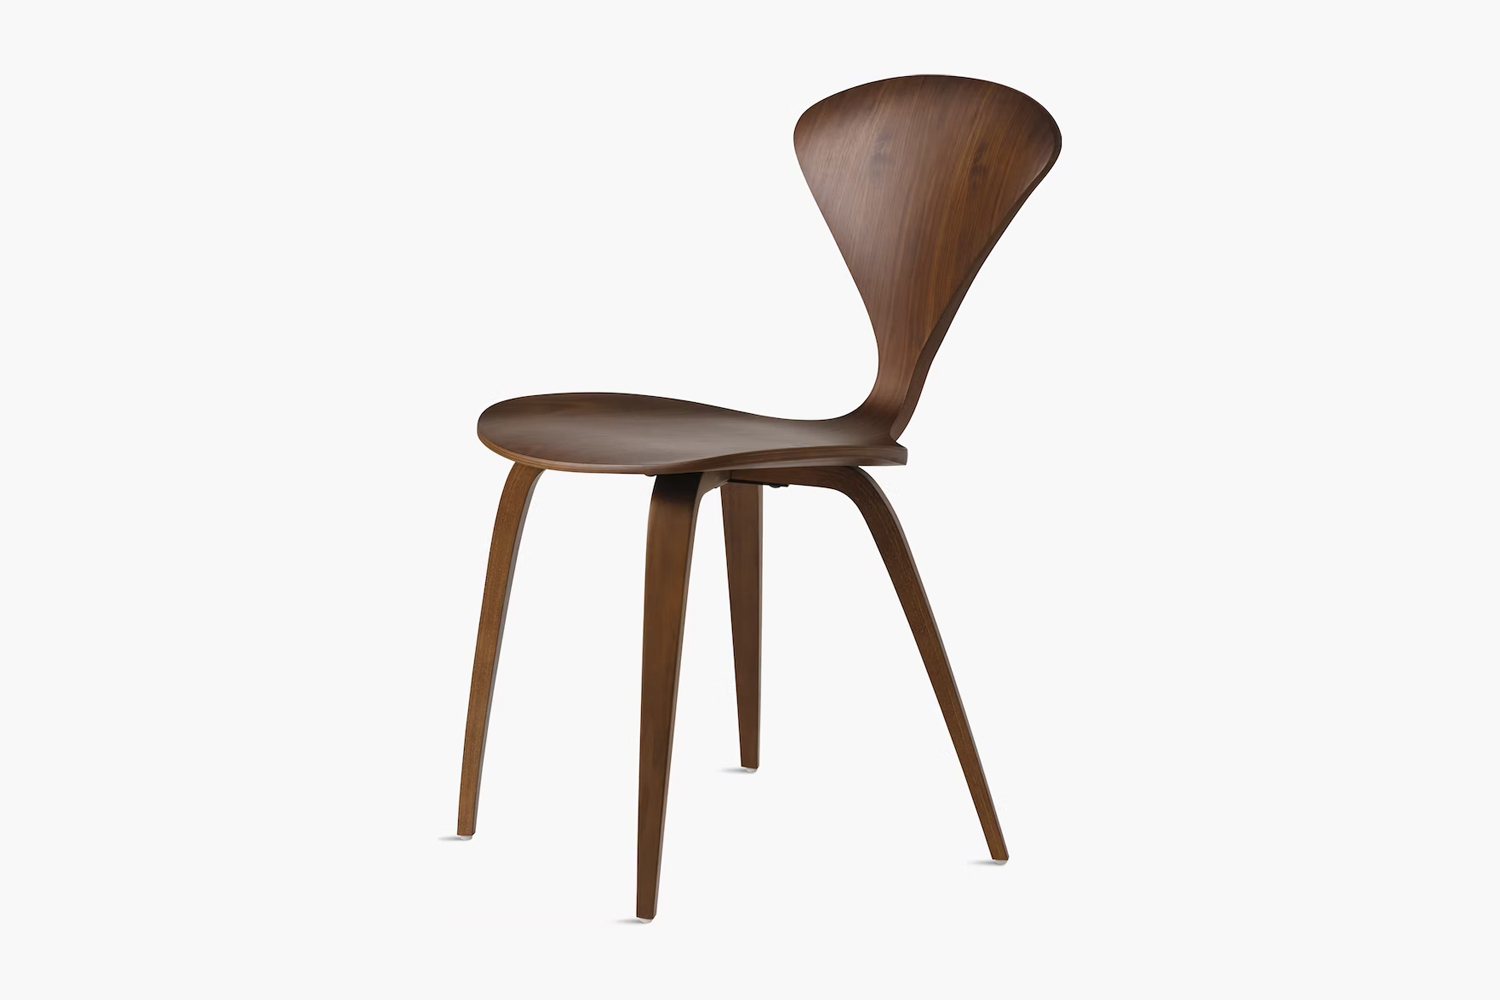 the classic cherner side chair is \$995 at design within reach. 11